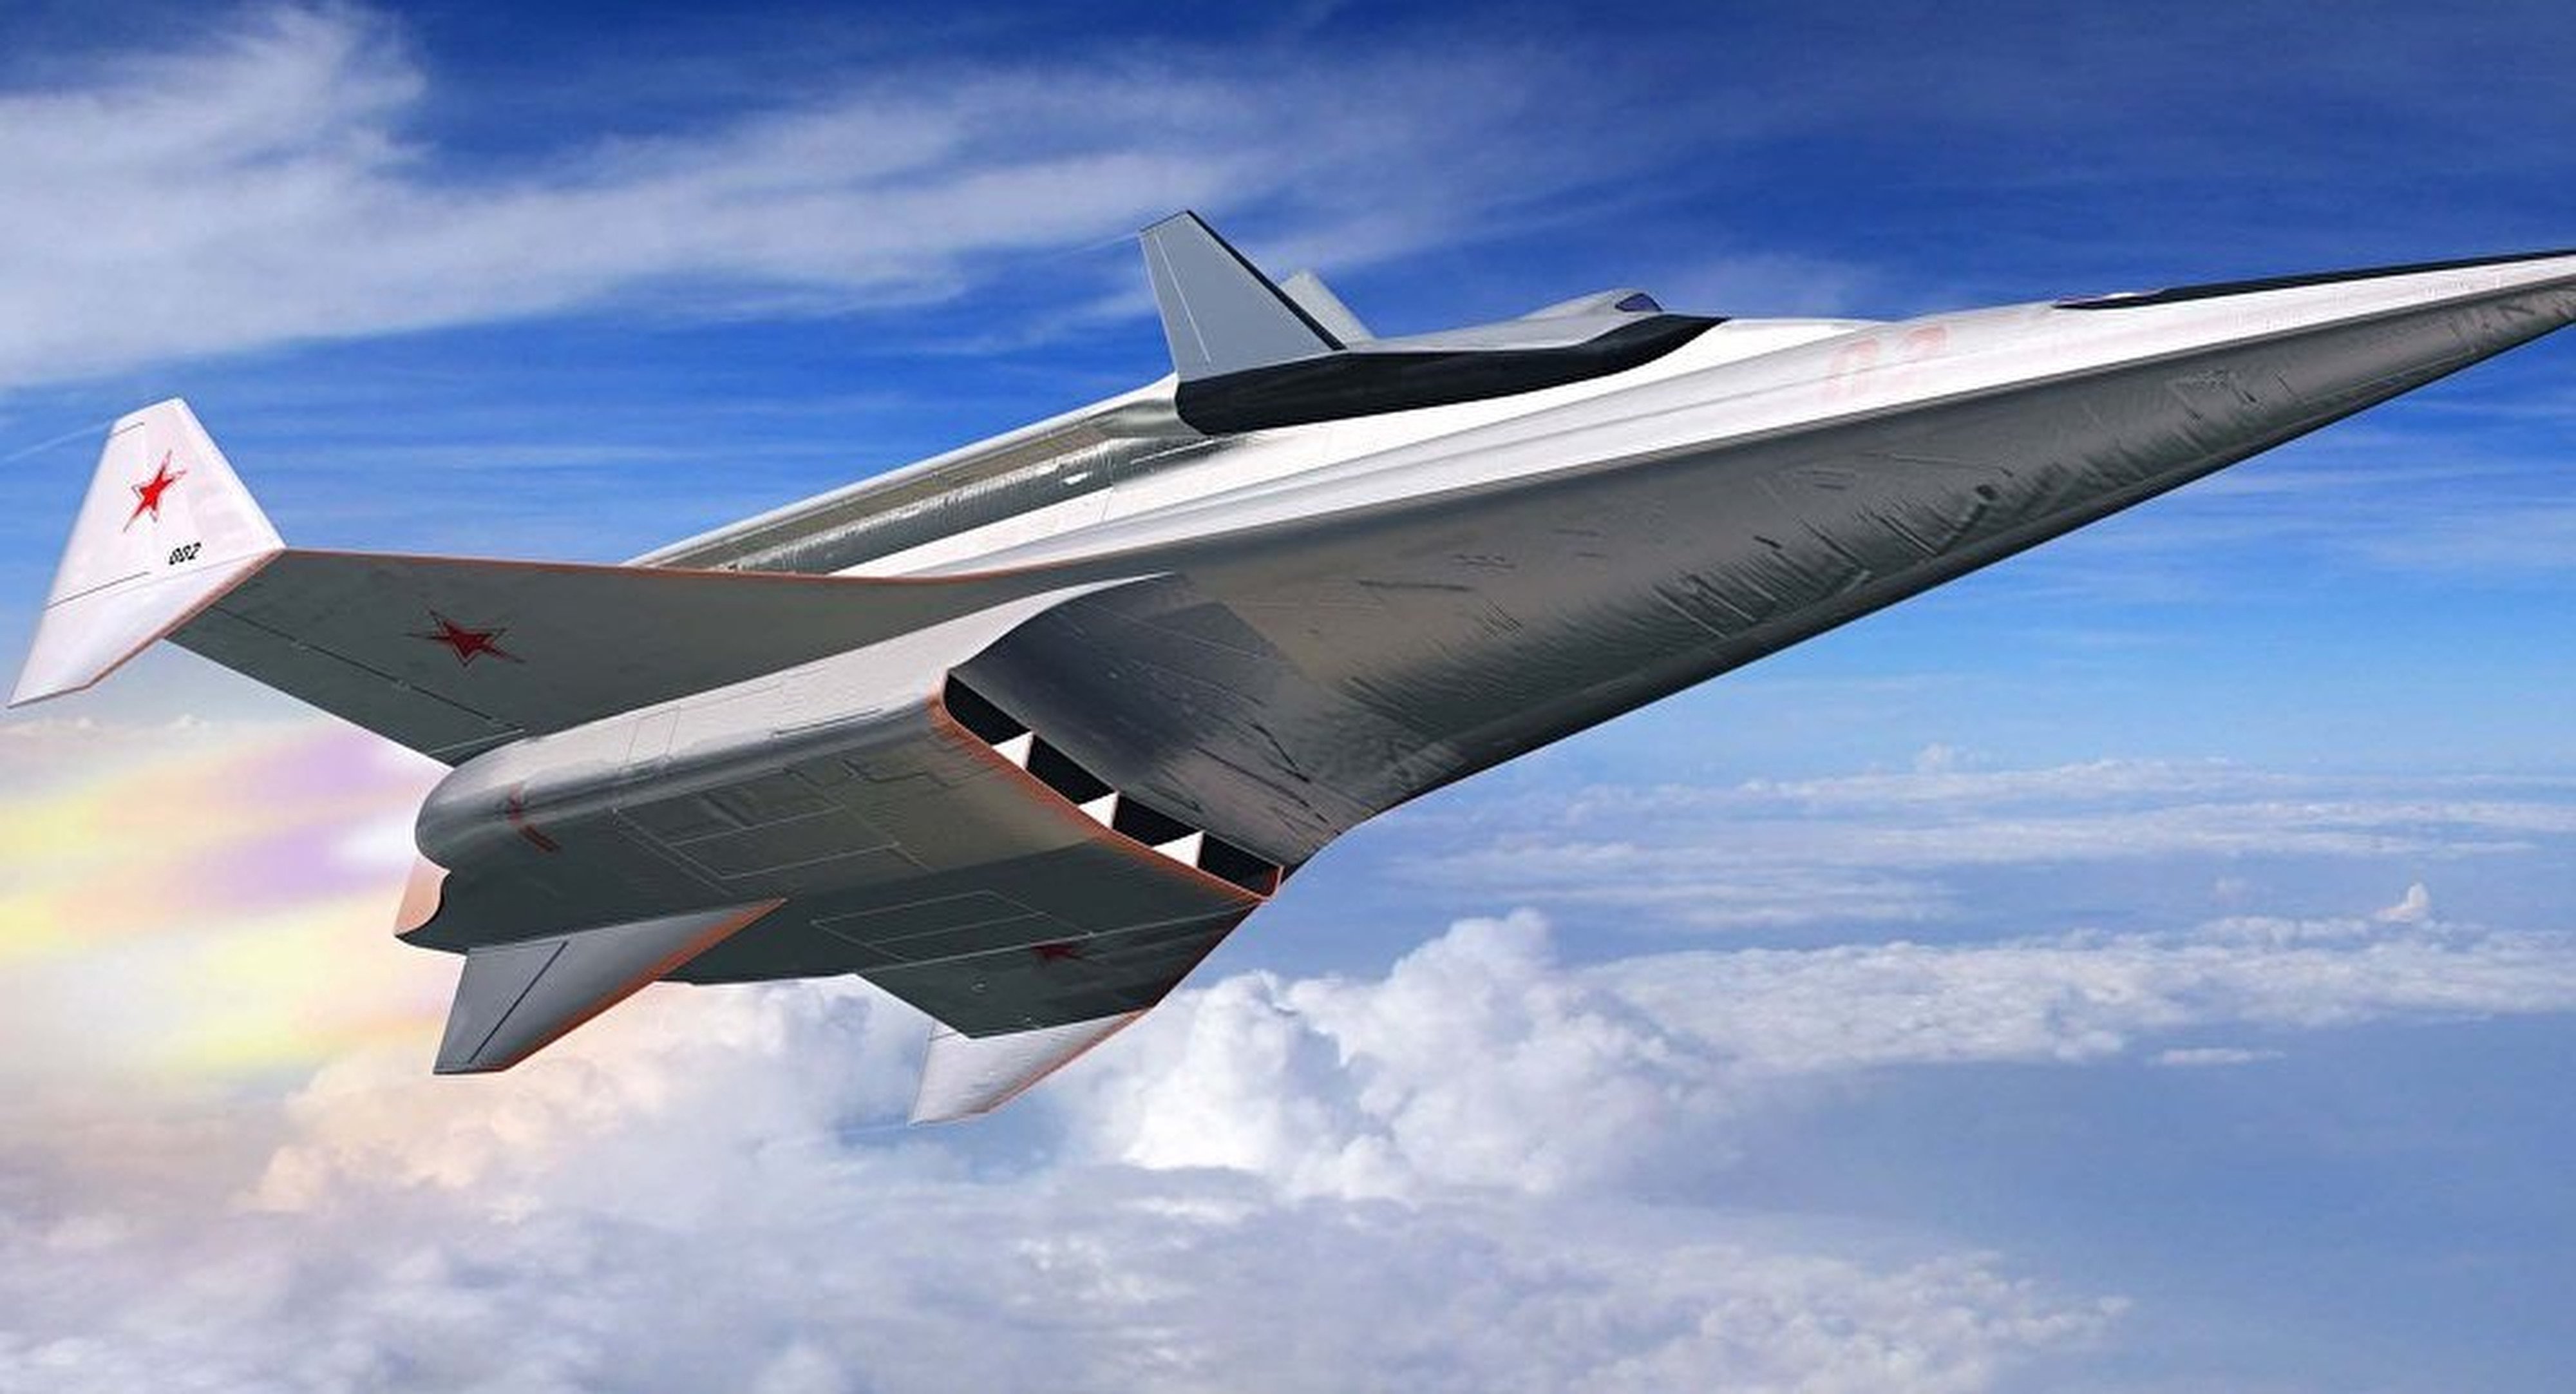 The Chinese government plans to build a fleet of hypersonic aircraft that can transport passengers anywhere on the planet in an hour or two. Photo: SCMP